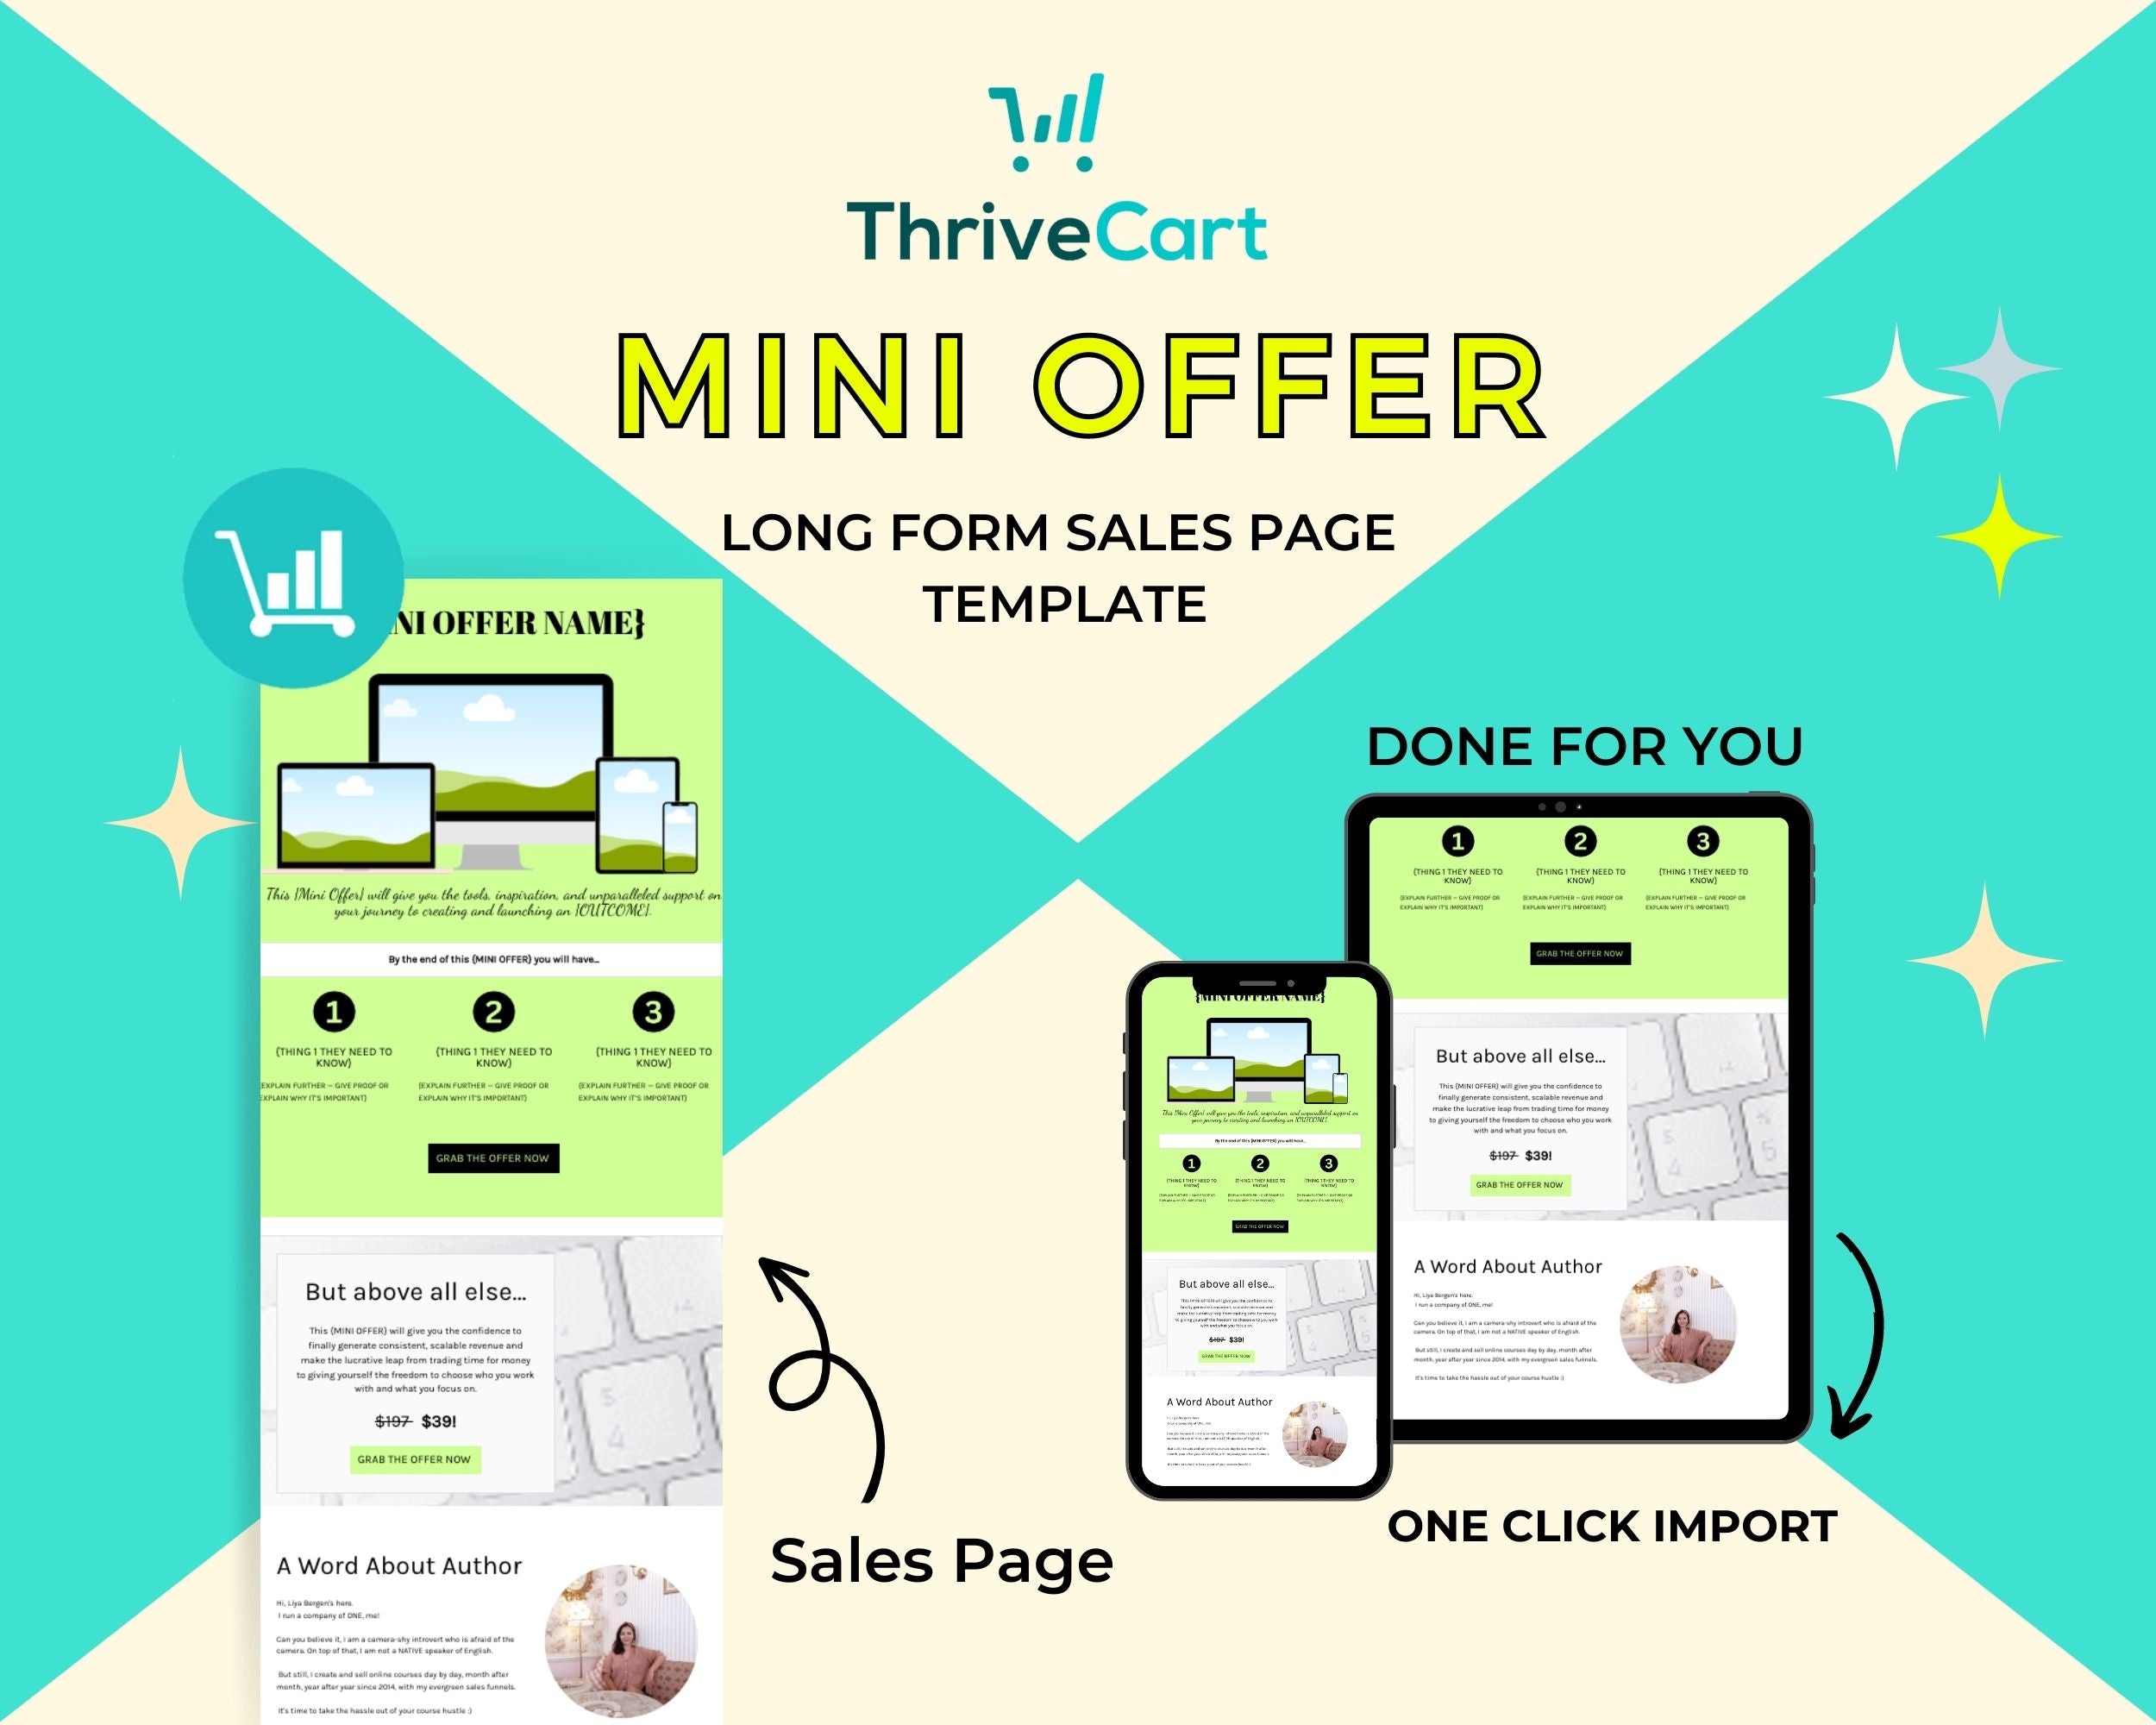 Mini Offer Sales Page Template in ThriveCart